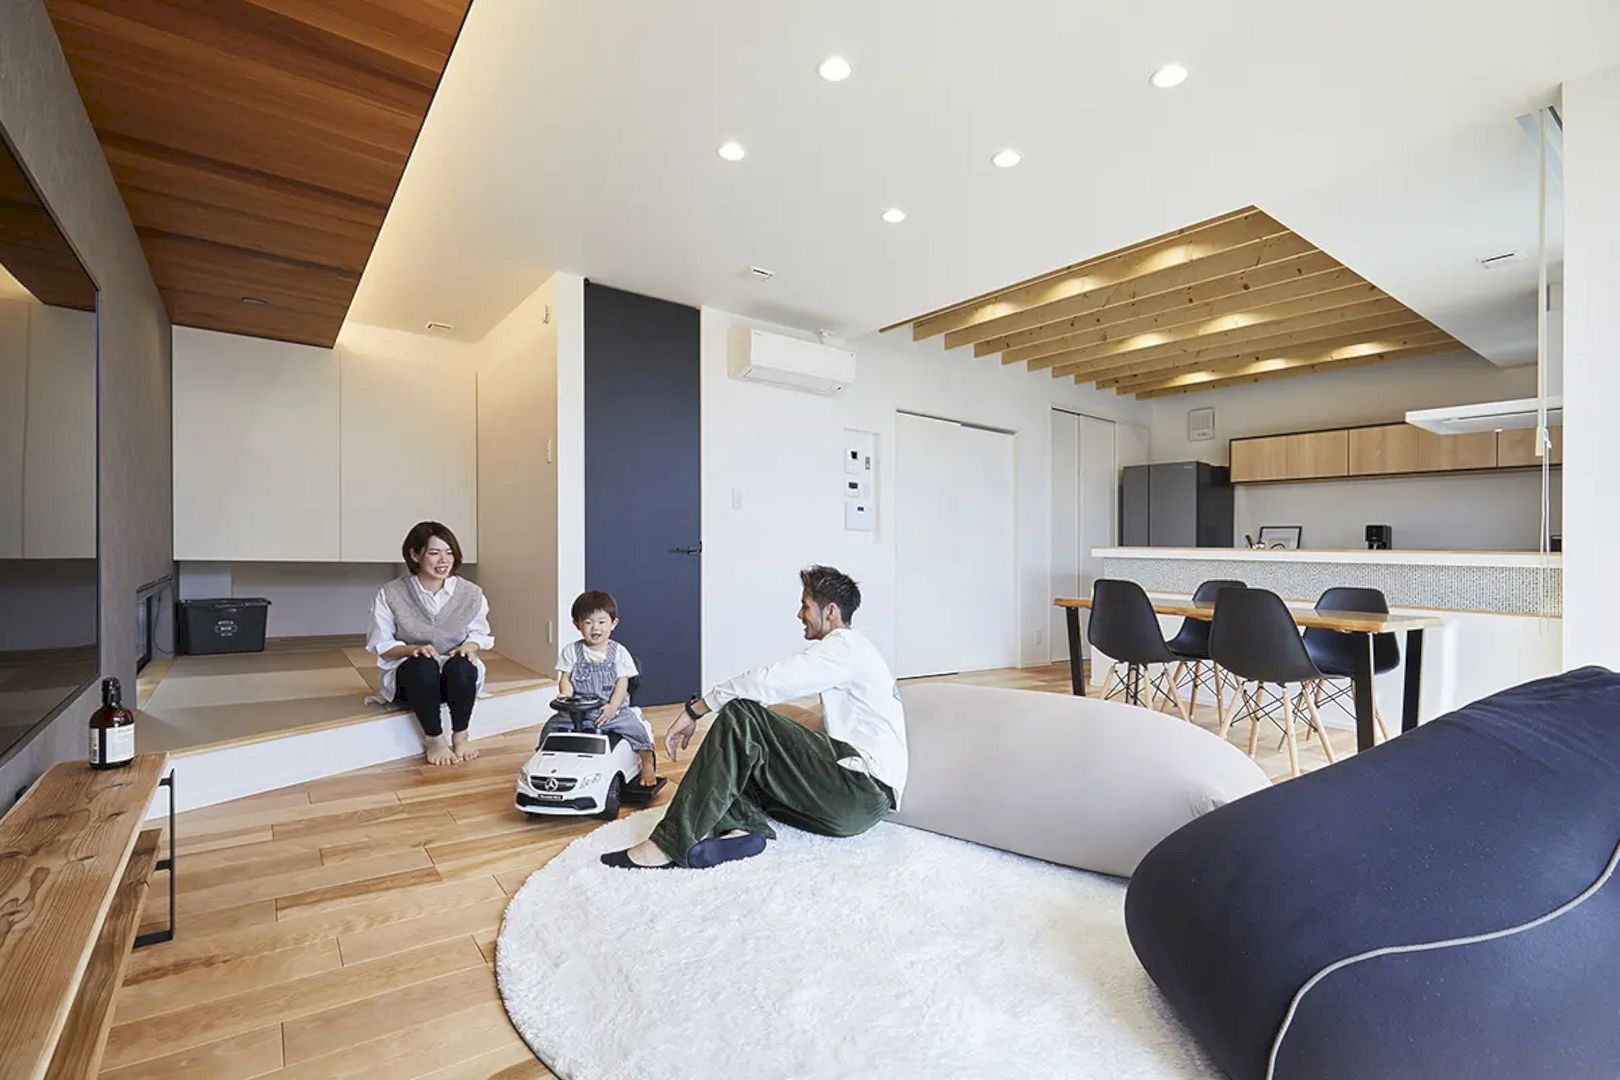 A Simple House Design With A Bright And Open Space 1